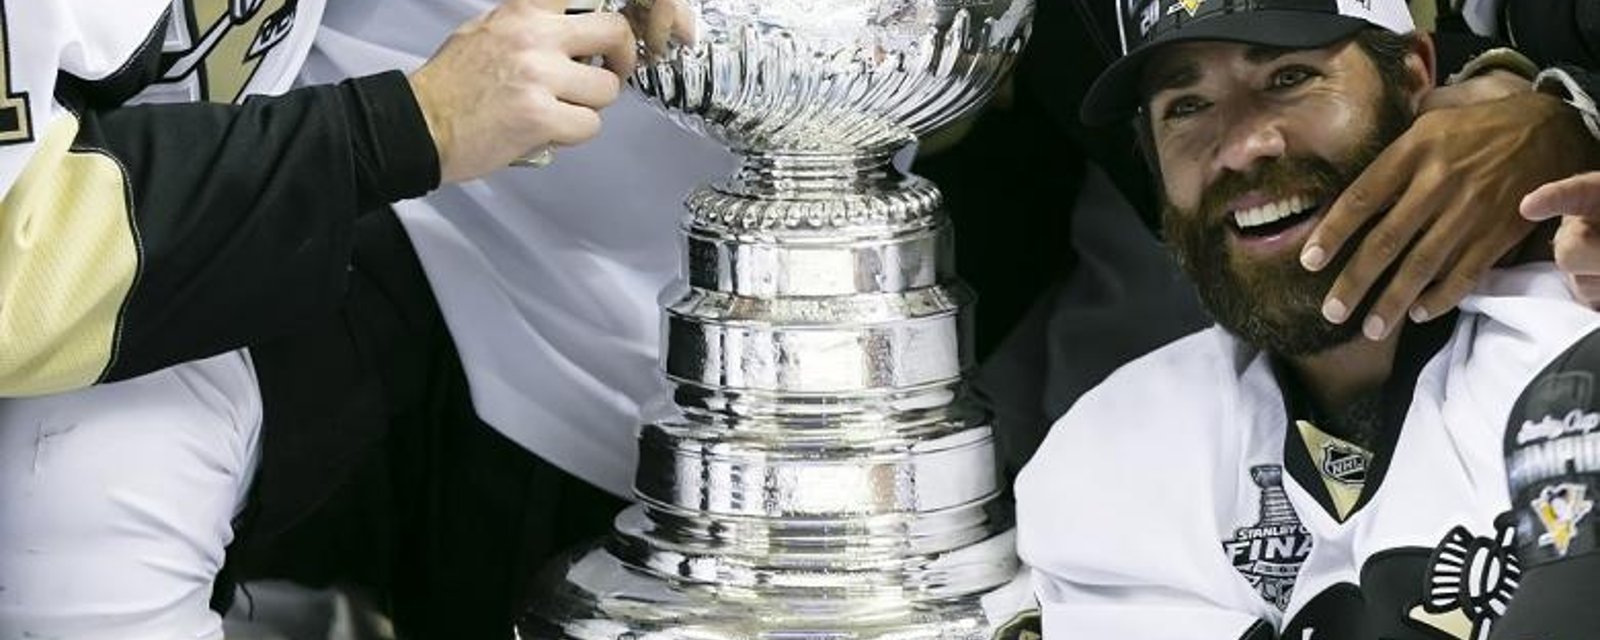 Picture appears to reveal damage to the Stanley Cup.